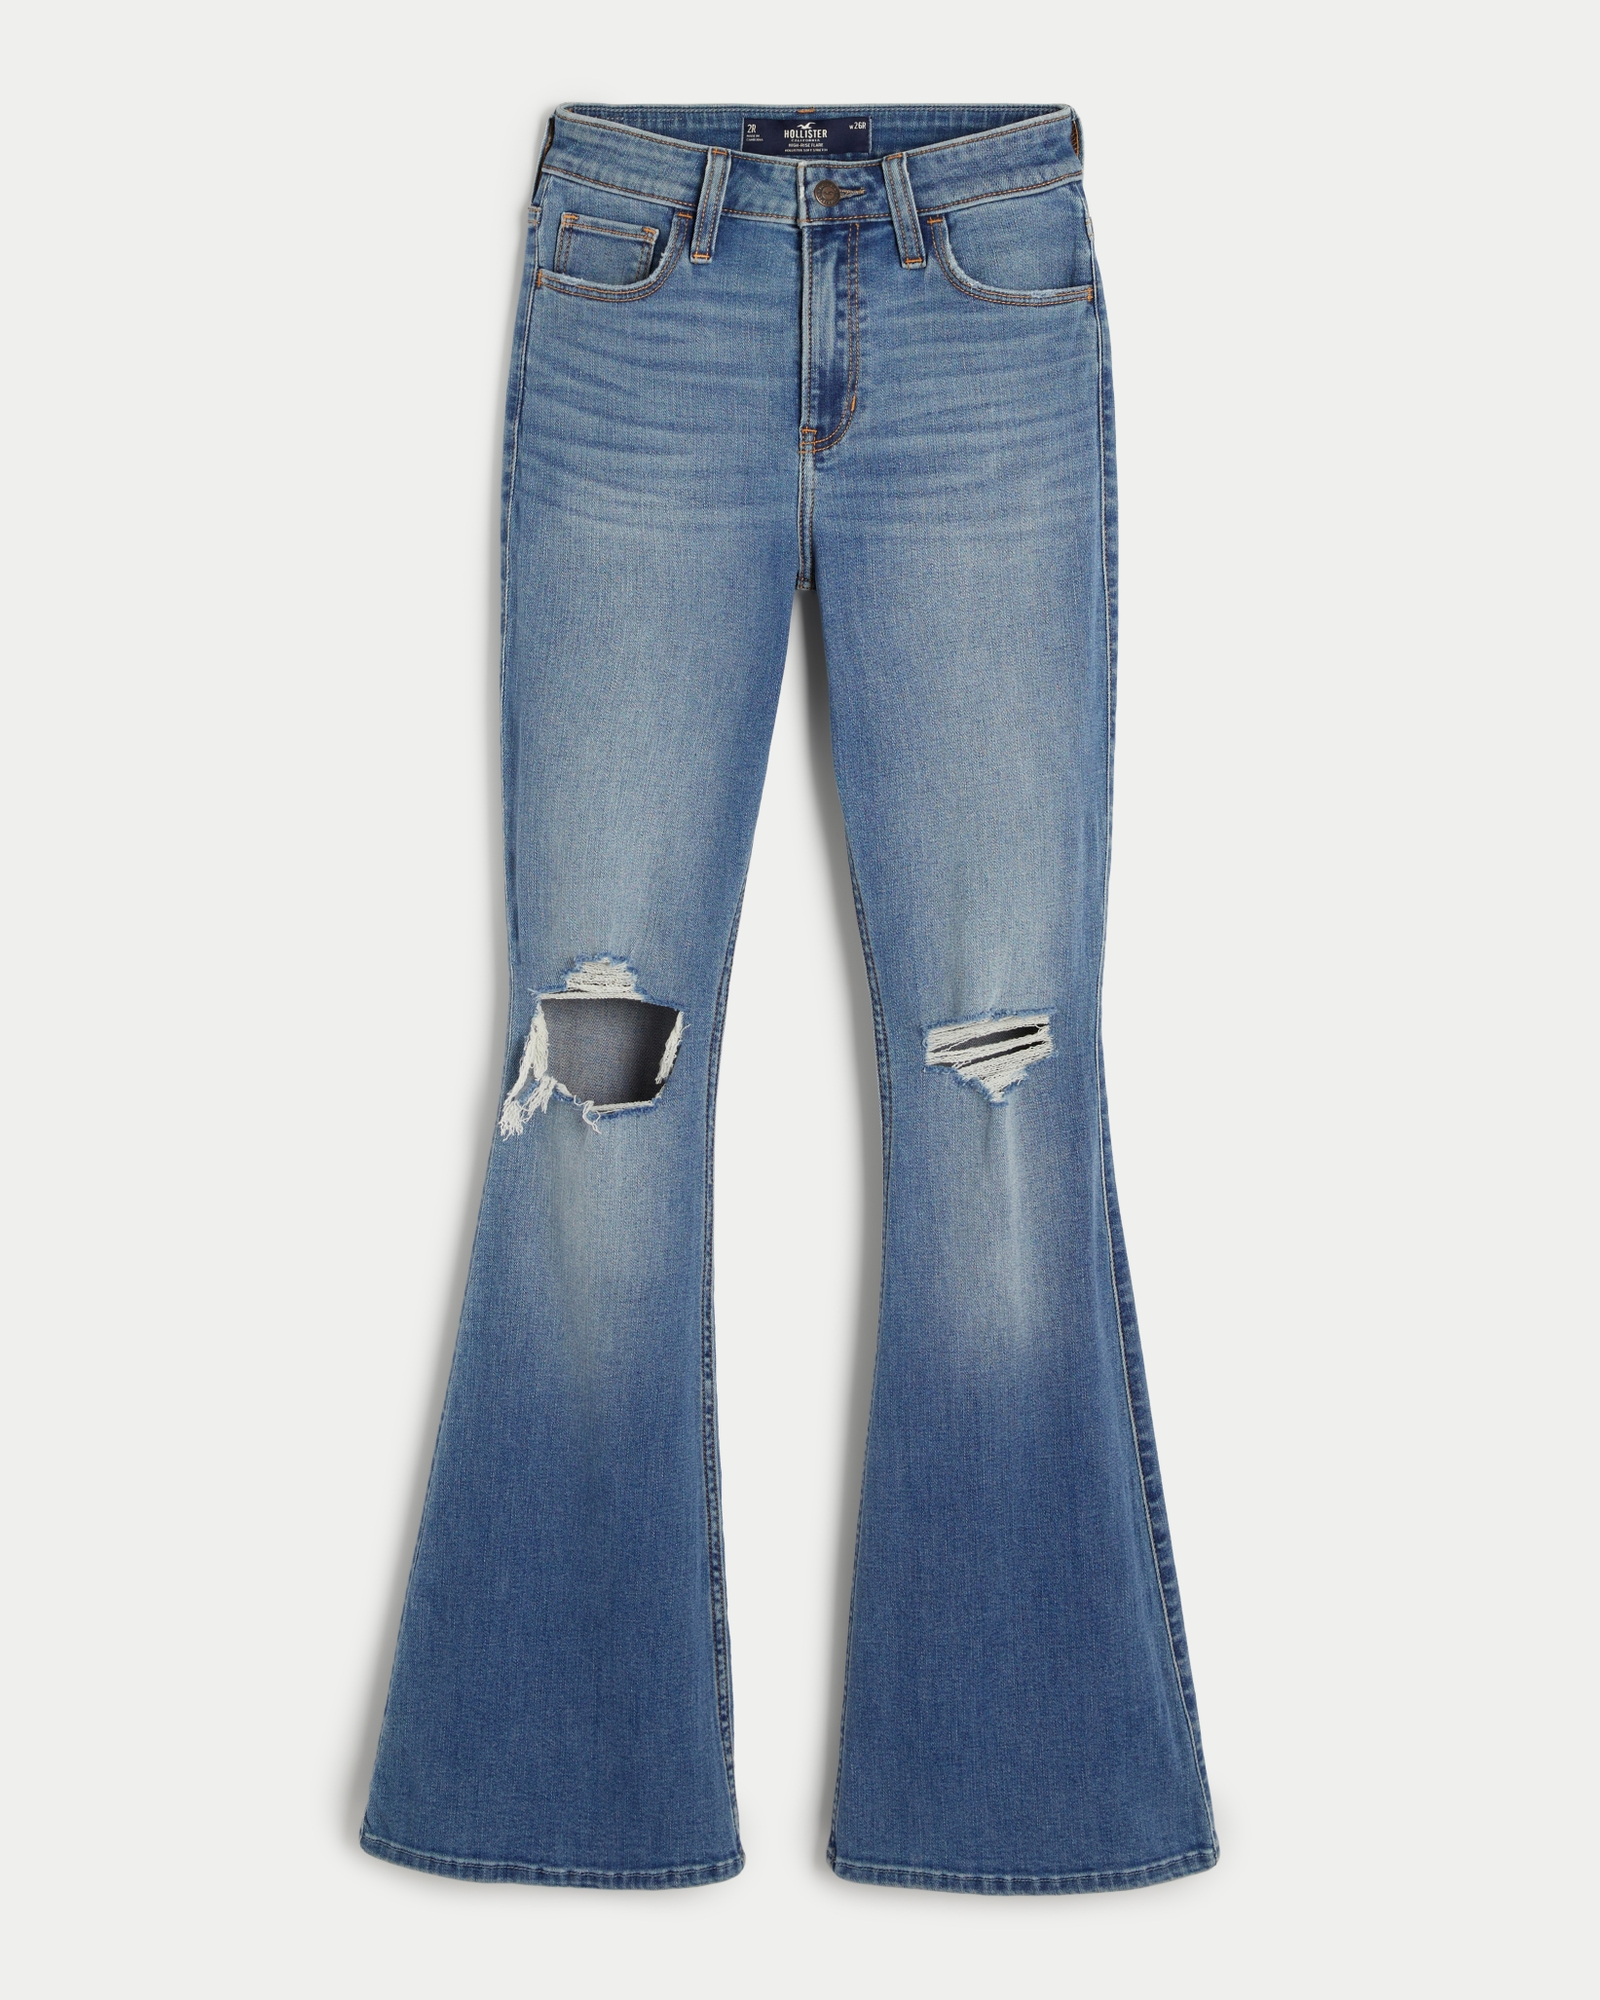 Abercrombie & Fitch HIGH RISE FLARE JEANS - Flared Jeans - LIGHT  DESTROY/destroyed denim 